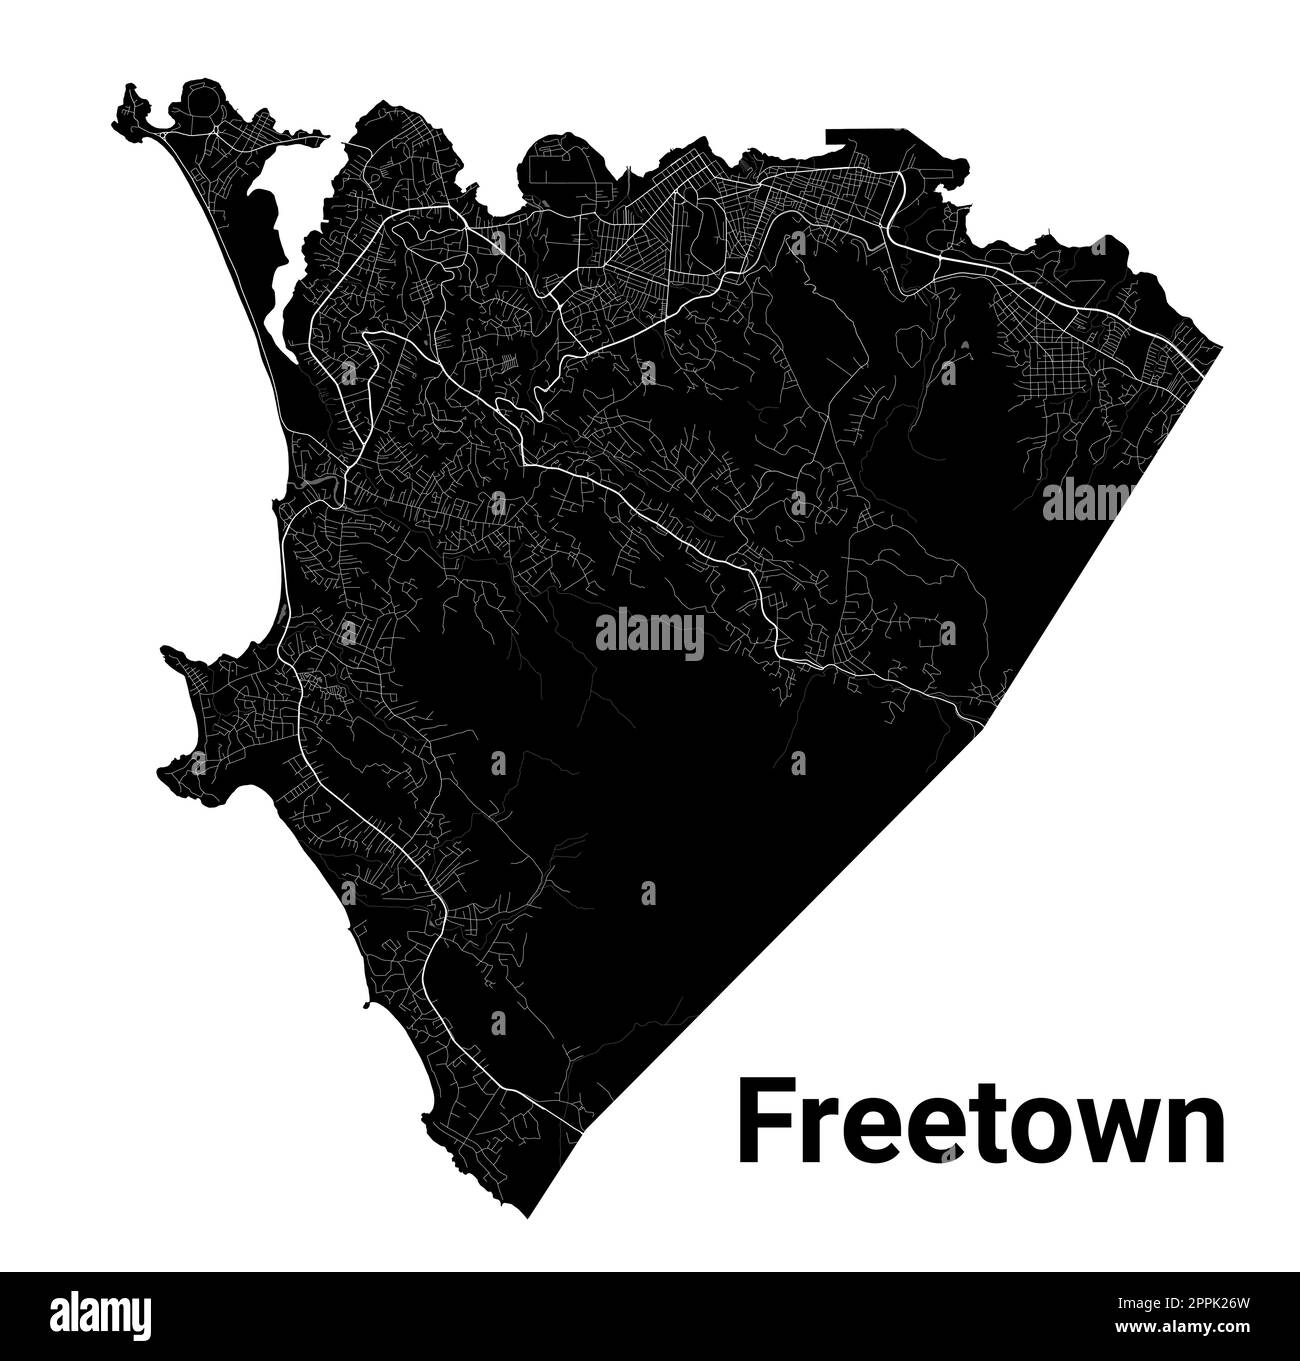 Freetown, Sierra Leone map. Detailed black map of Freetown city administrative area. Cityscape poster metropolitan aria view. Black land with white ro Stock Vector